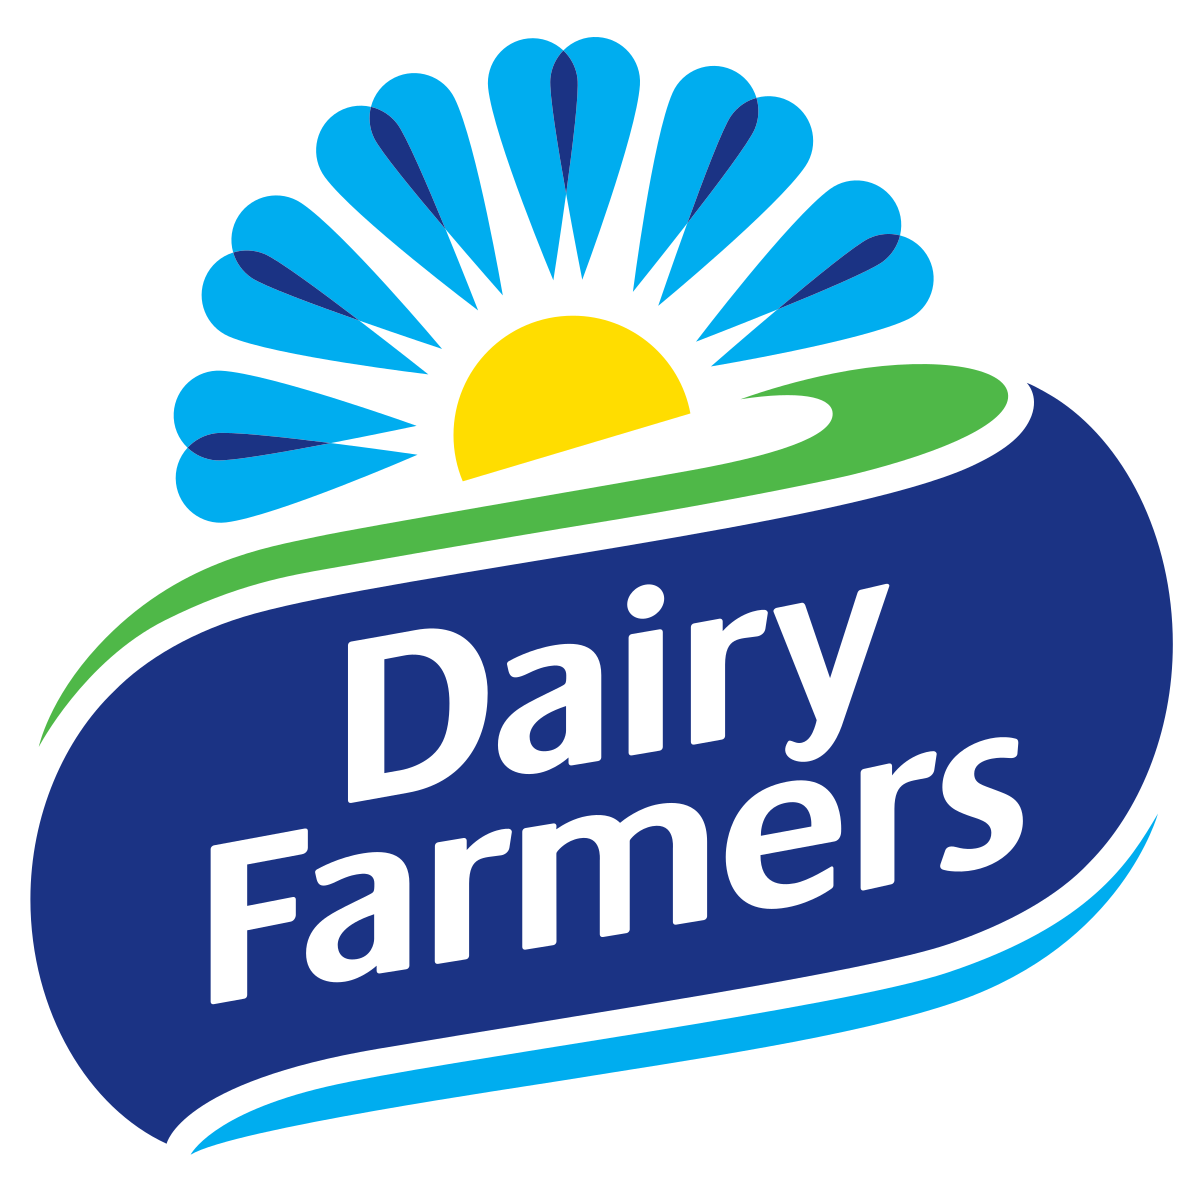 dairy farmers, epic werks media web design and photography,